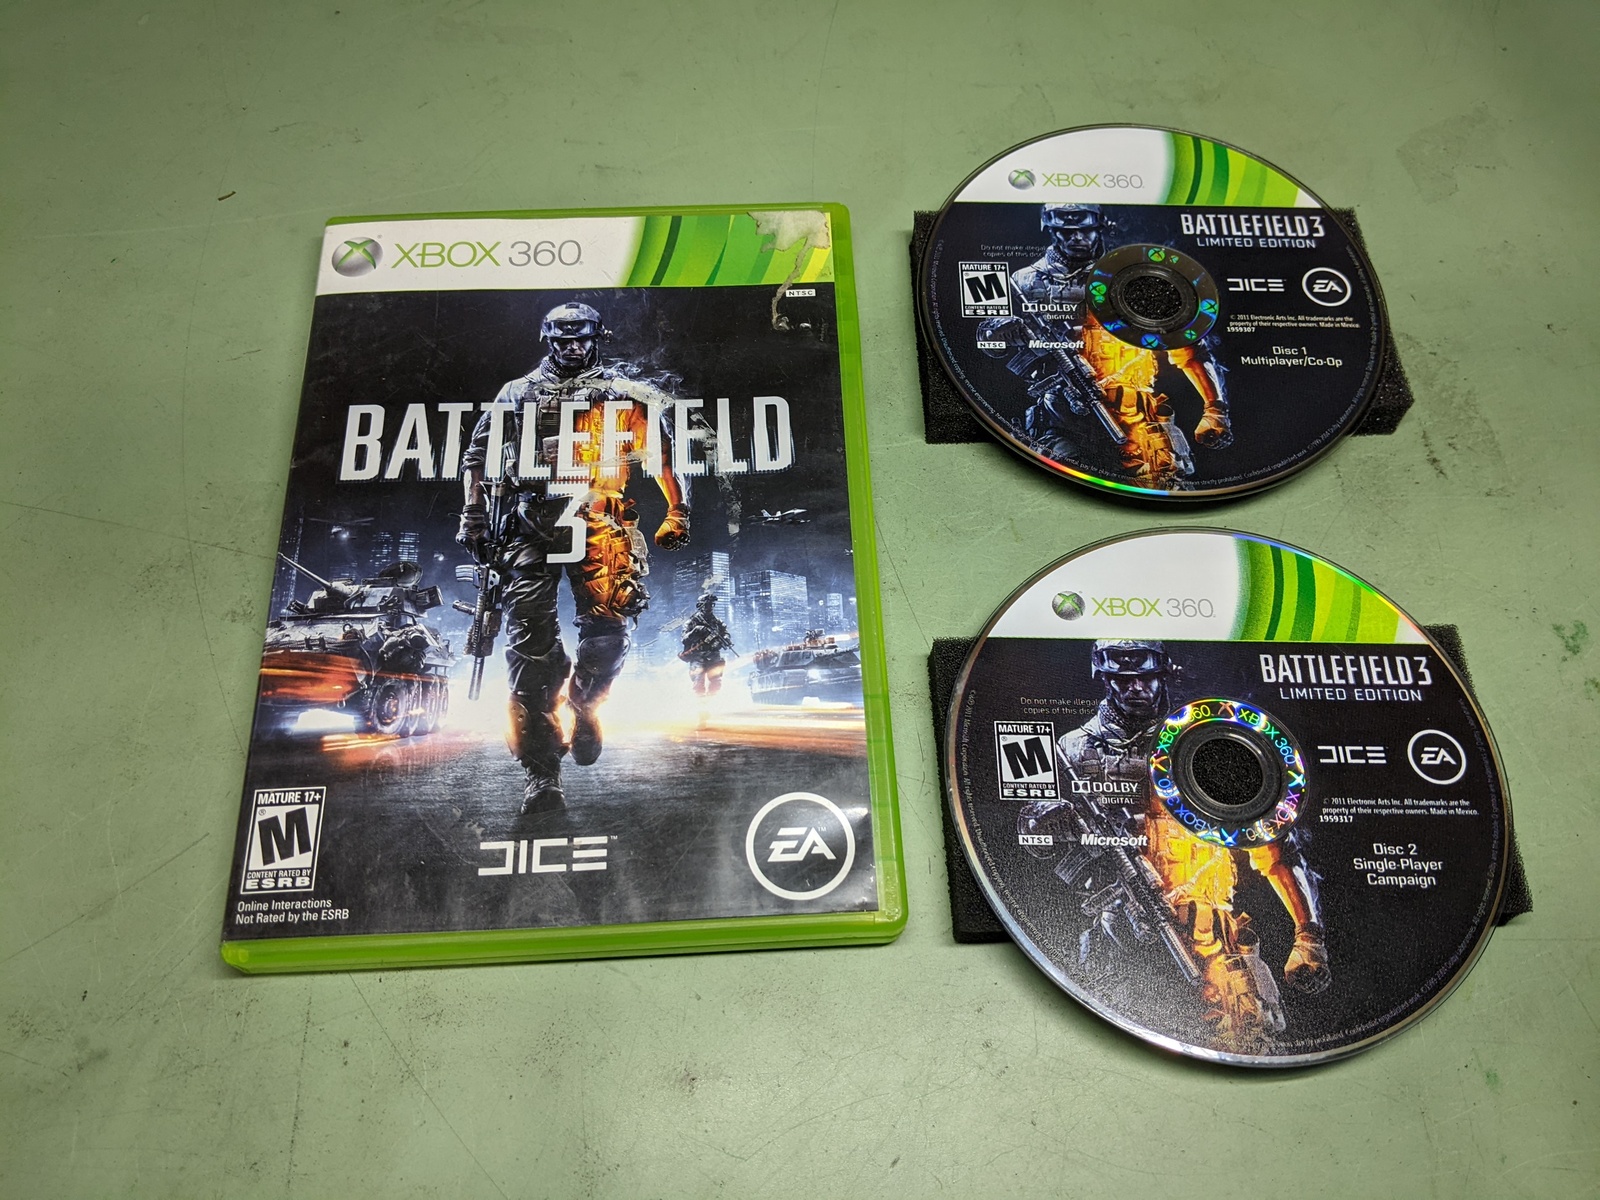 Primary image for Battlefield 3 [Limited Edition] Microsoft XBox360 Disk and Case